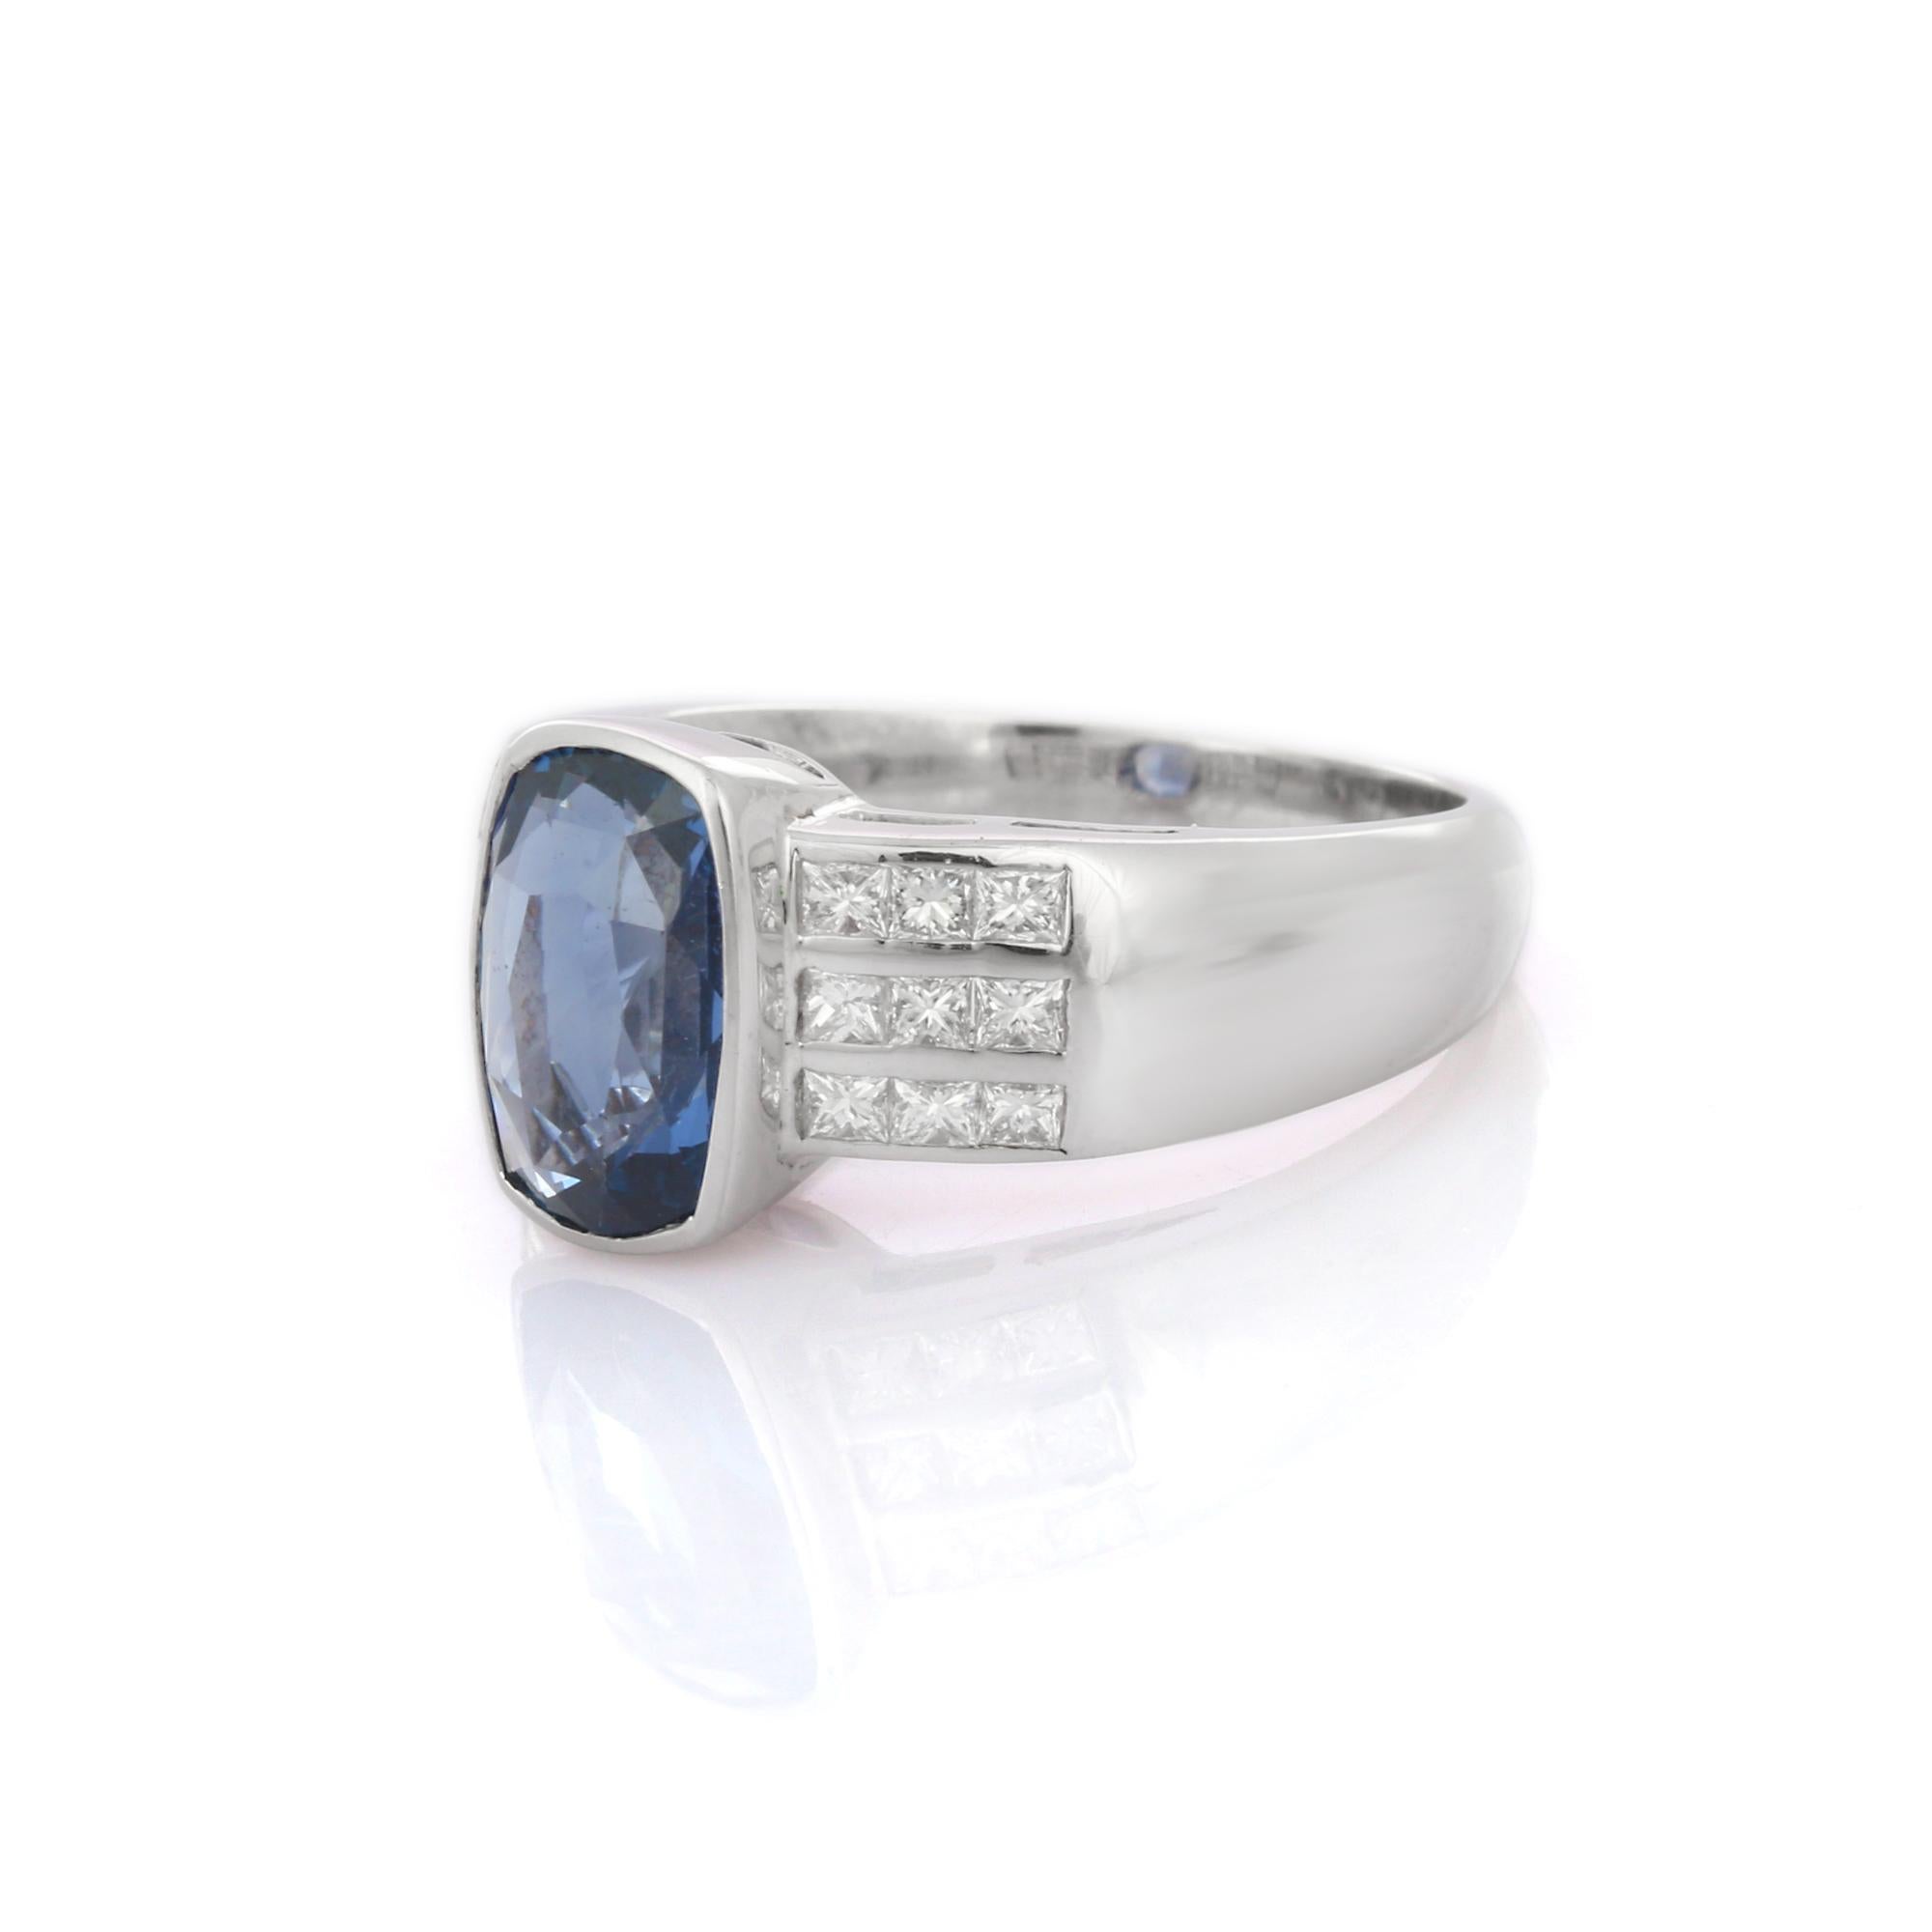 For Sale:  18K White Gold Oblong Cushion Cut Blue Sapphire and Diamond Engagement Ring 3